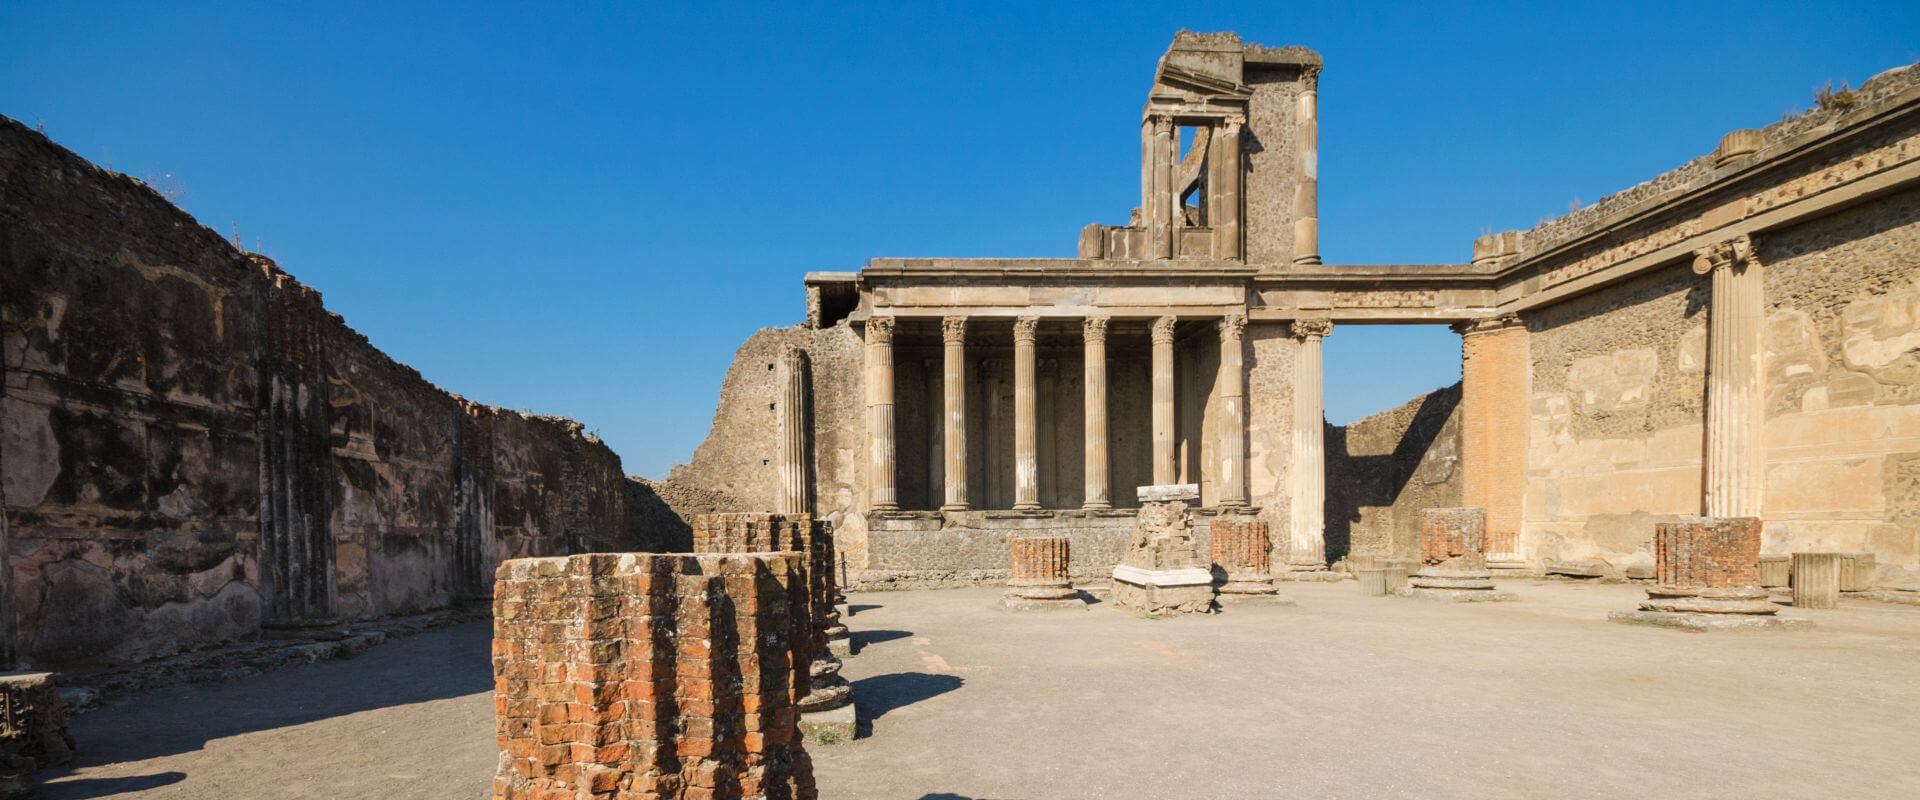 The ancient ruins of Pompeii in Italy